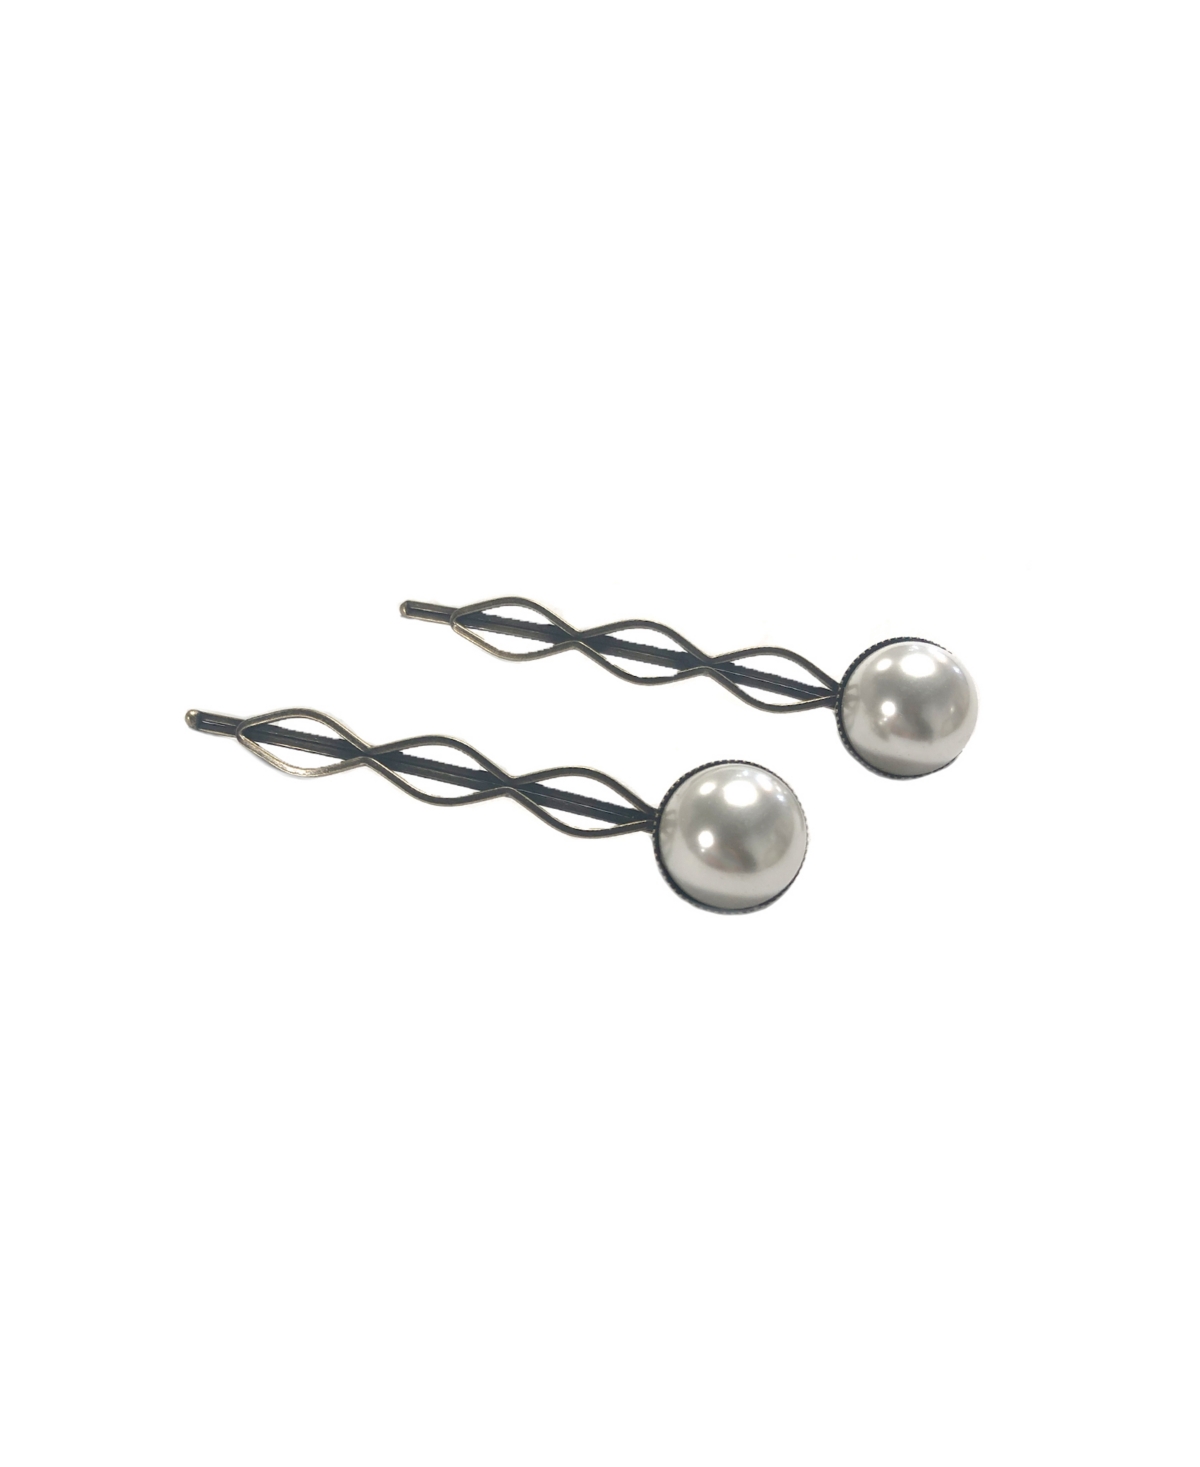 Imitation Pearl 2 piece Bobby Pin - Clear